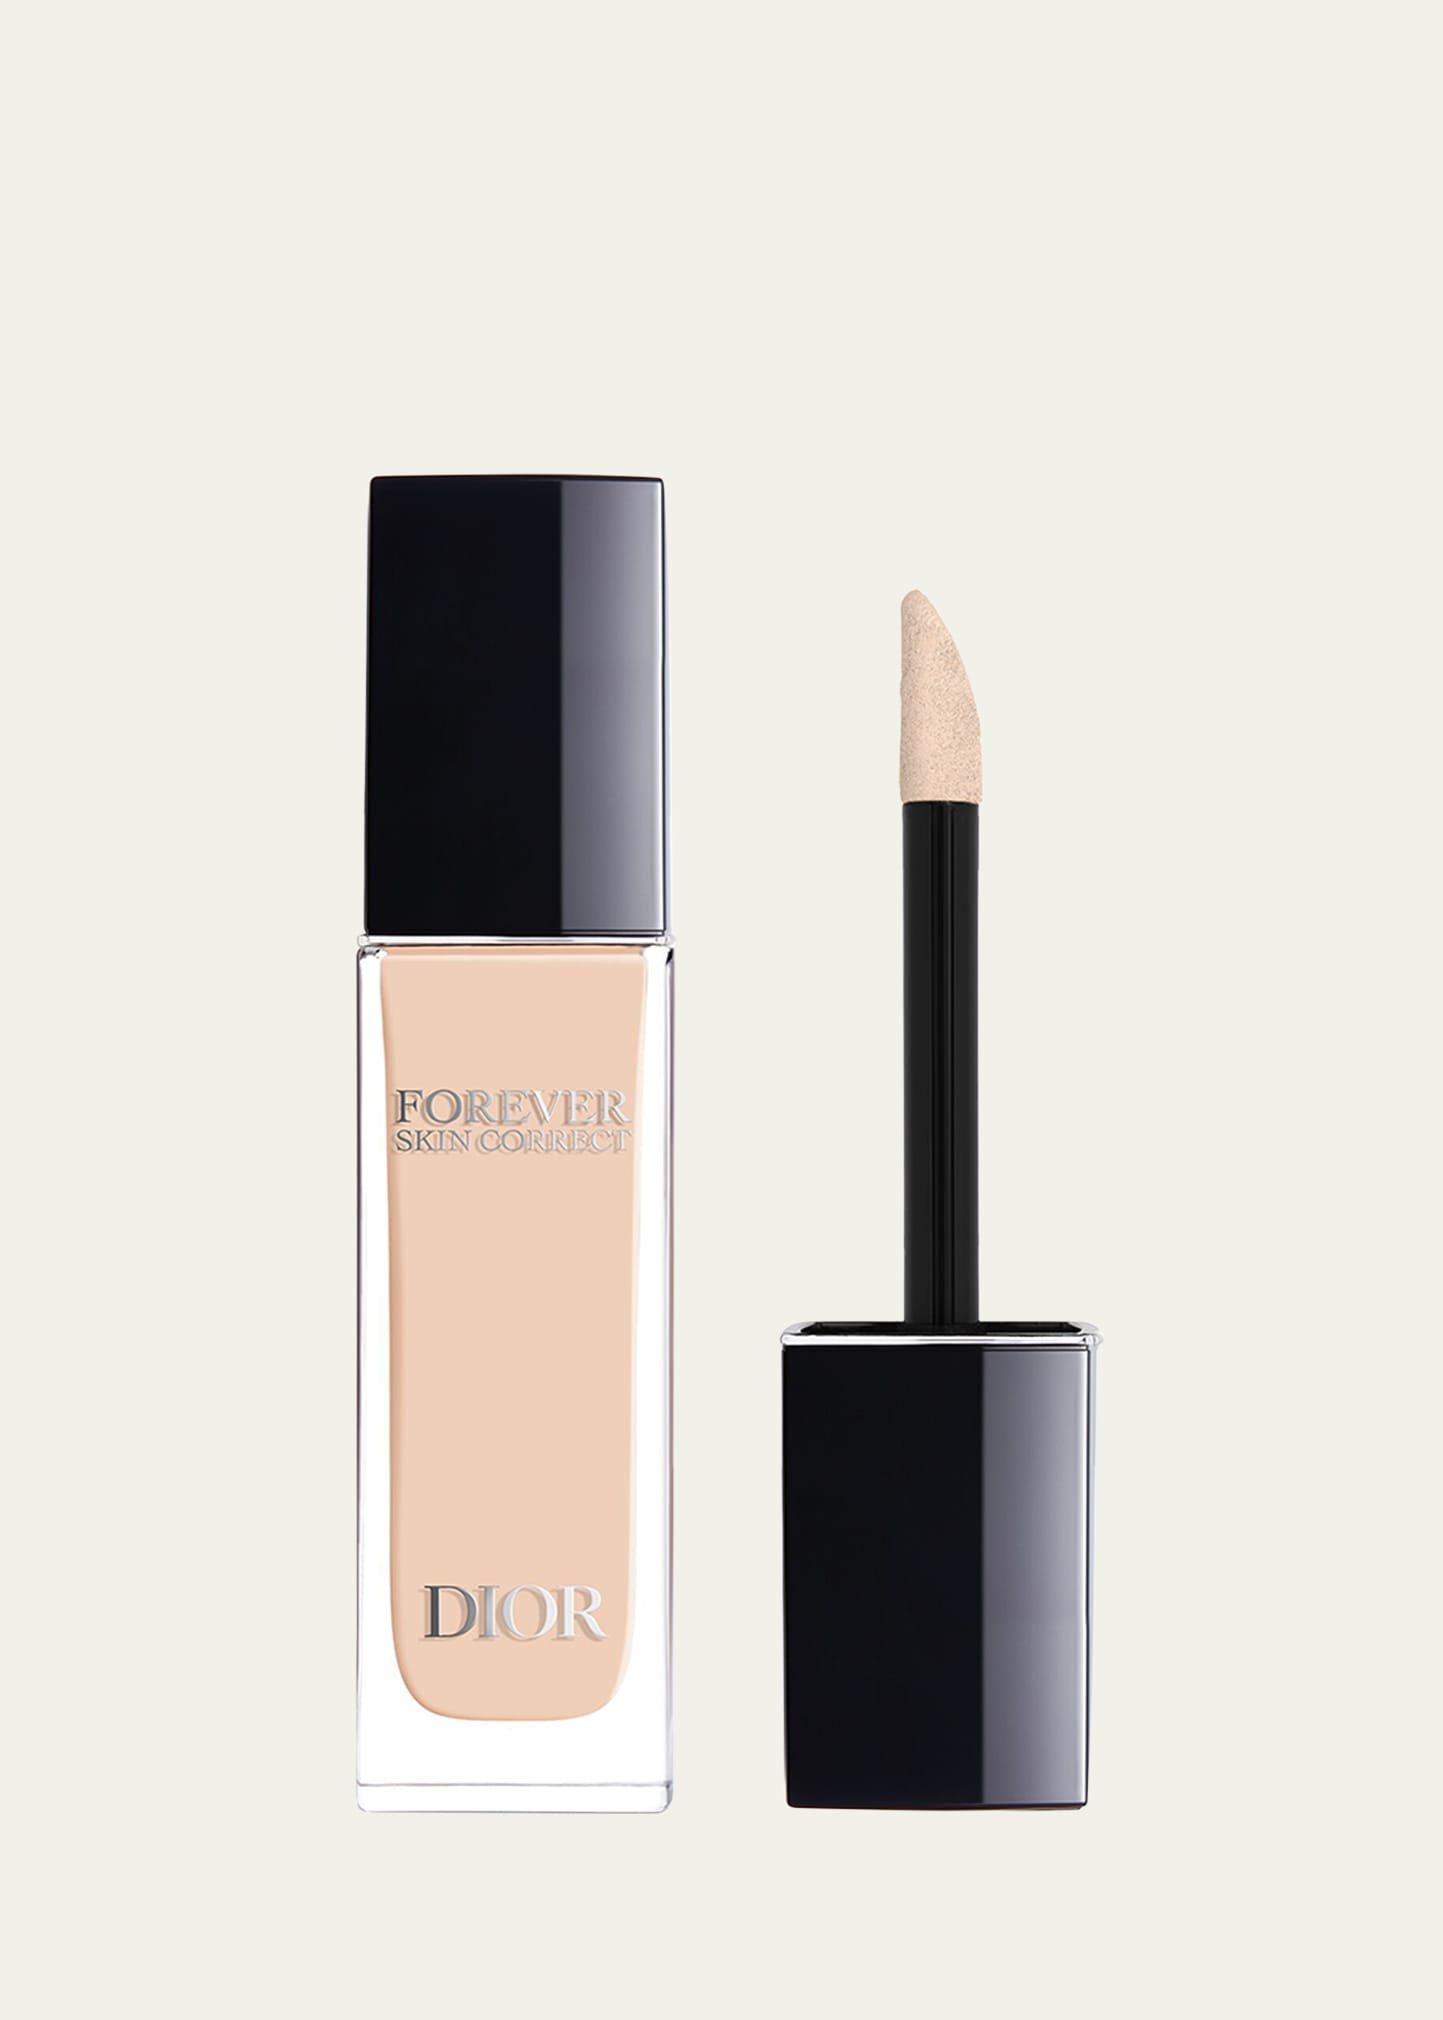 Dior Forever Skin Correct Full-coverage Concealer In 1 Cr Cool Rosy